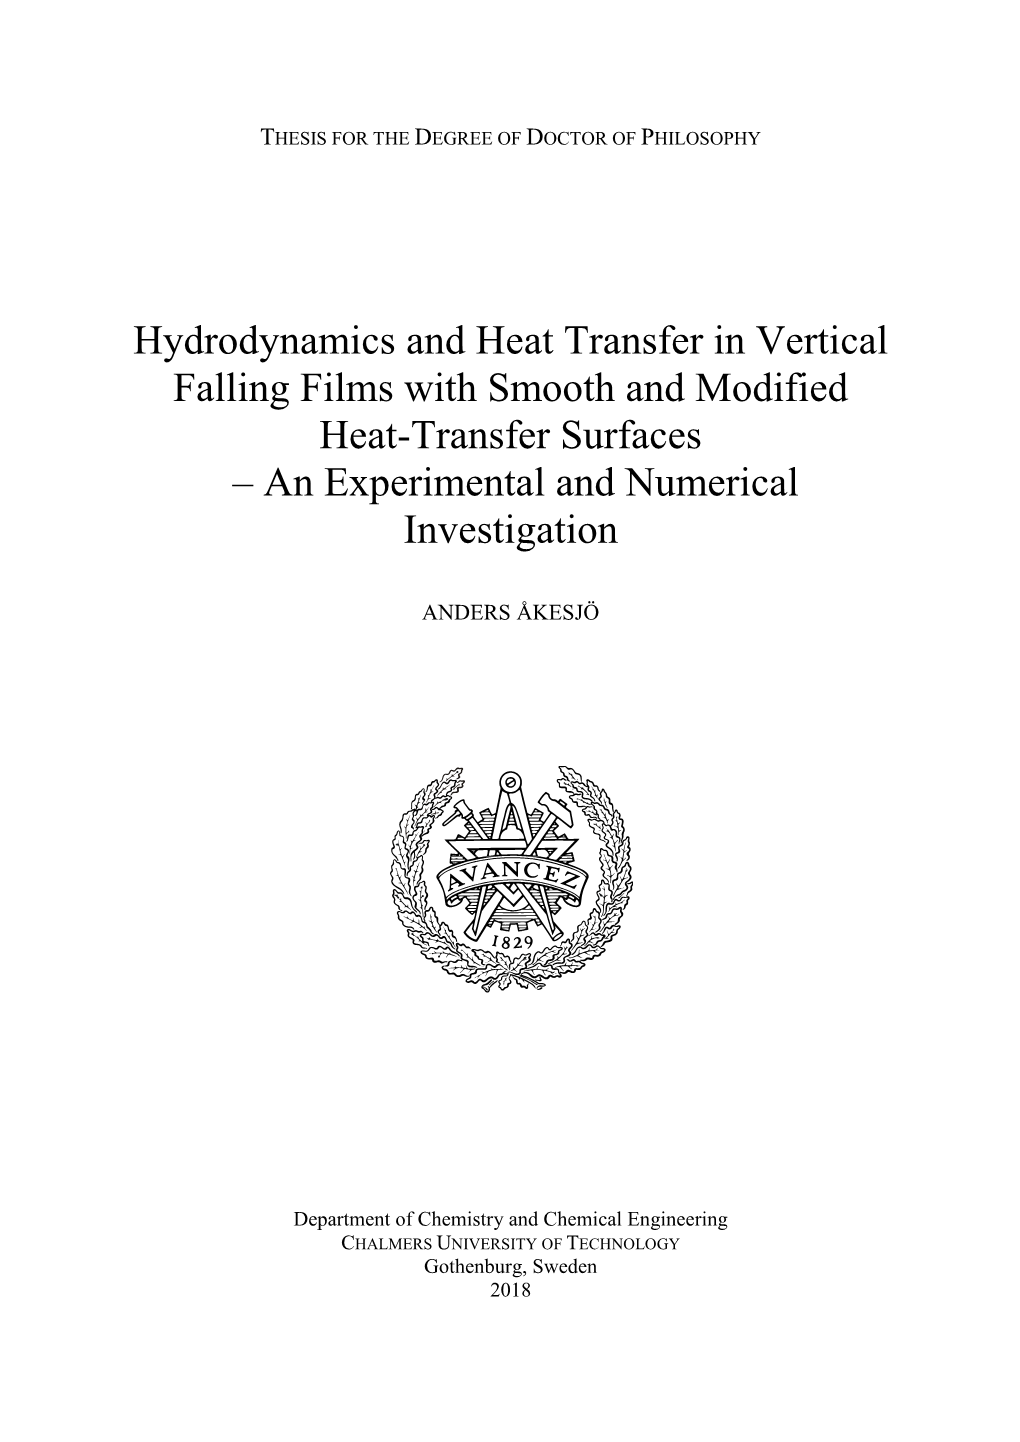 Hydrodynamics and Heat Transfer in Vertical Falling Films with Smooth and Modified Heat-Transfer Surfaces an Experimental